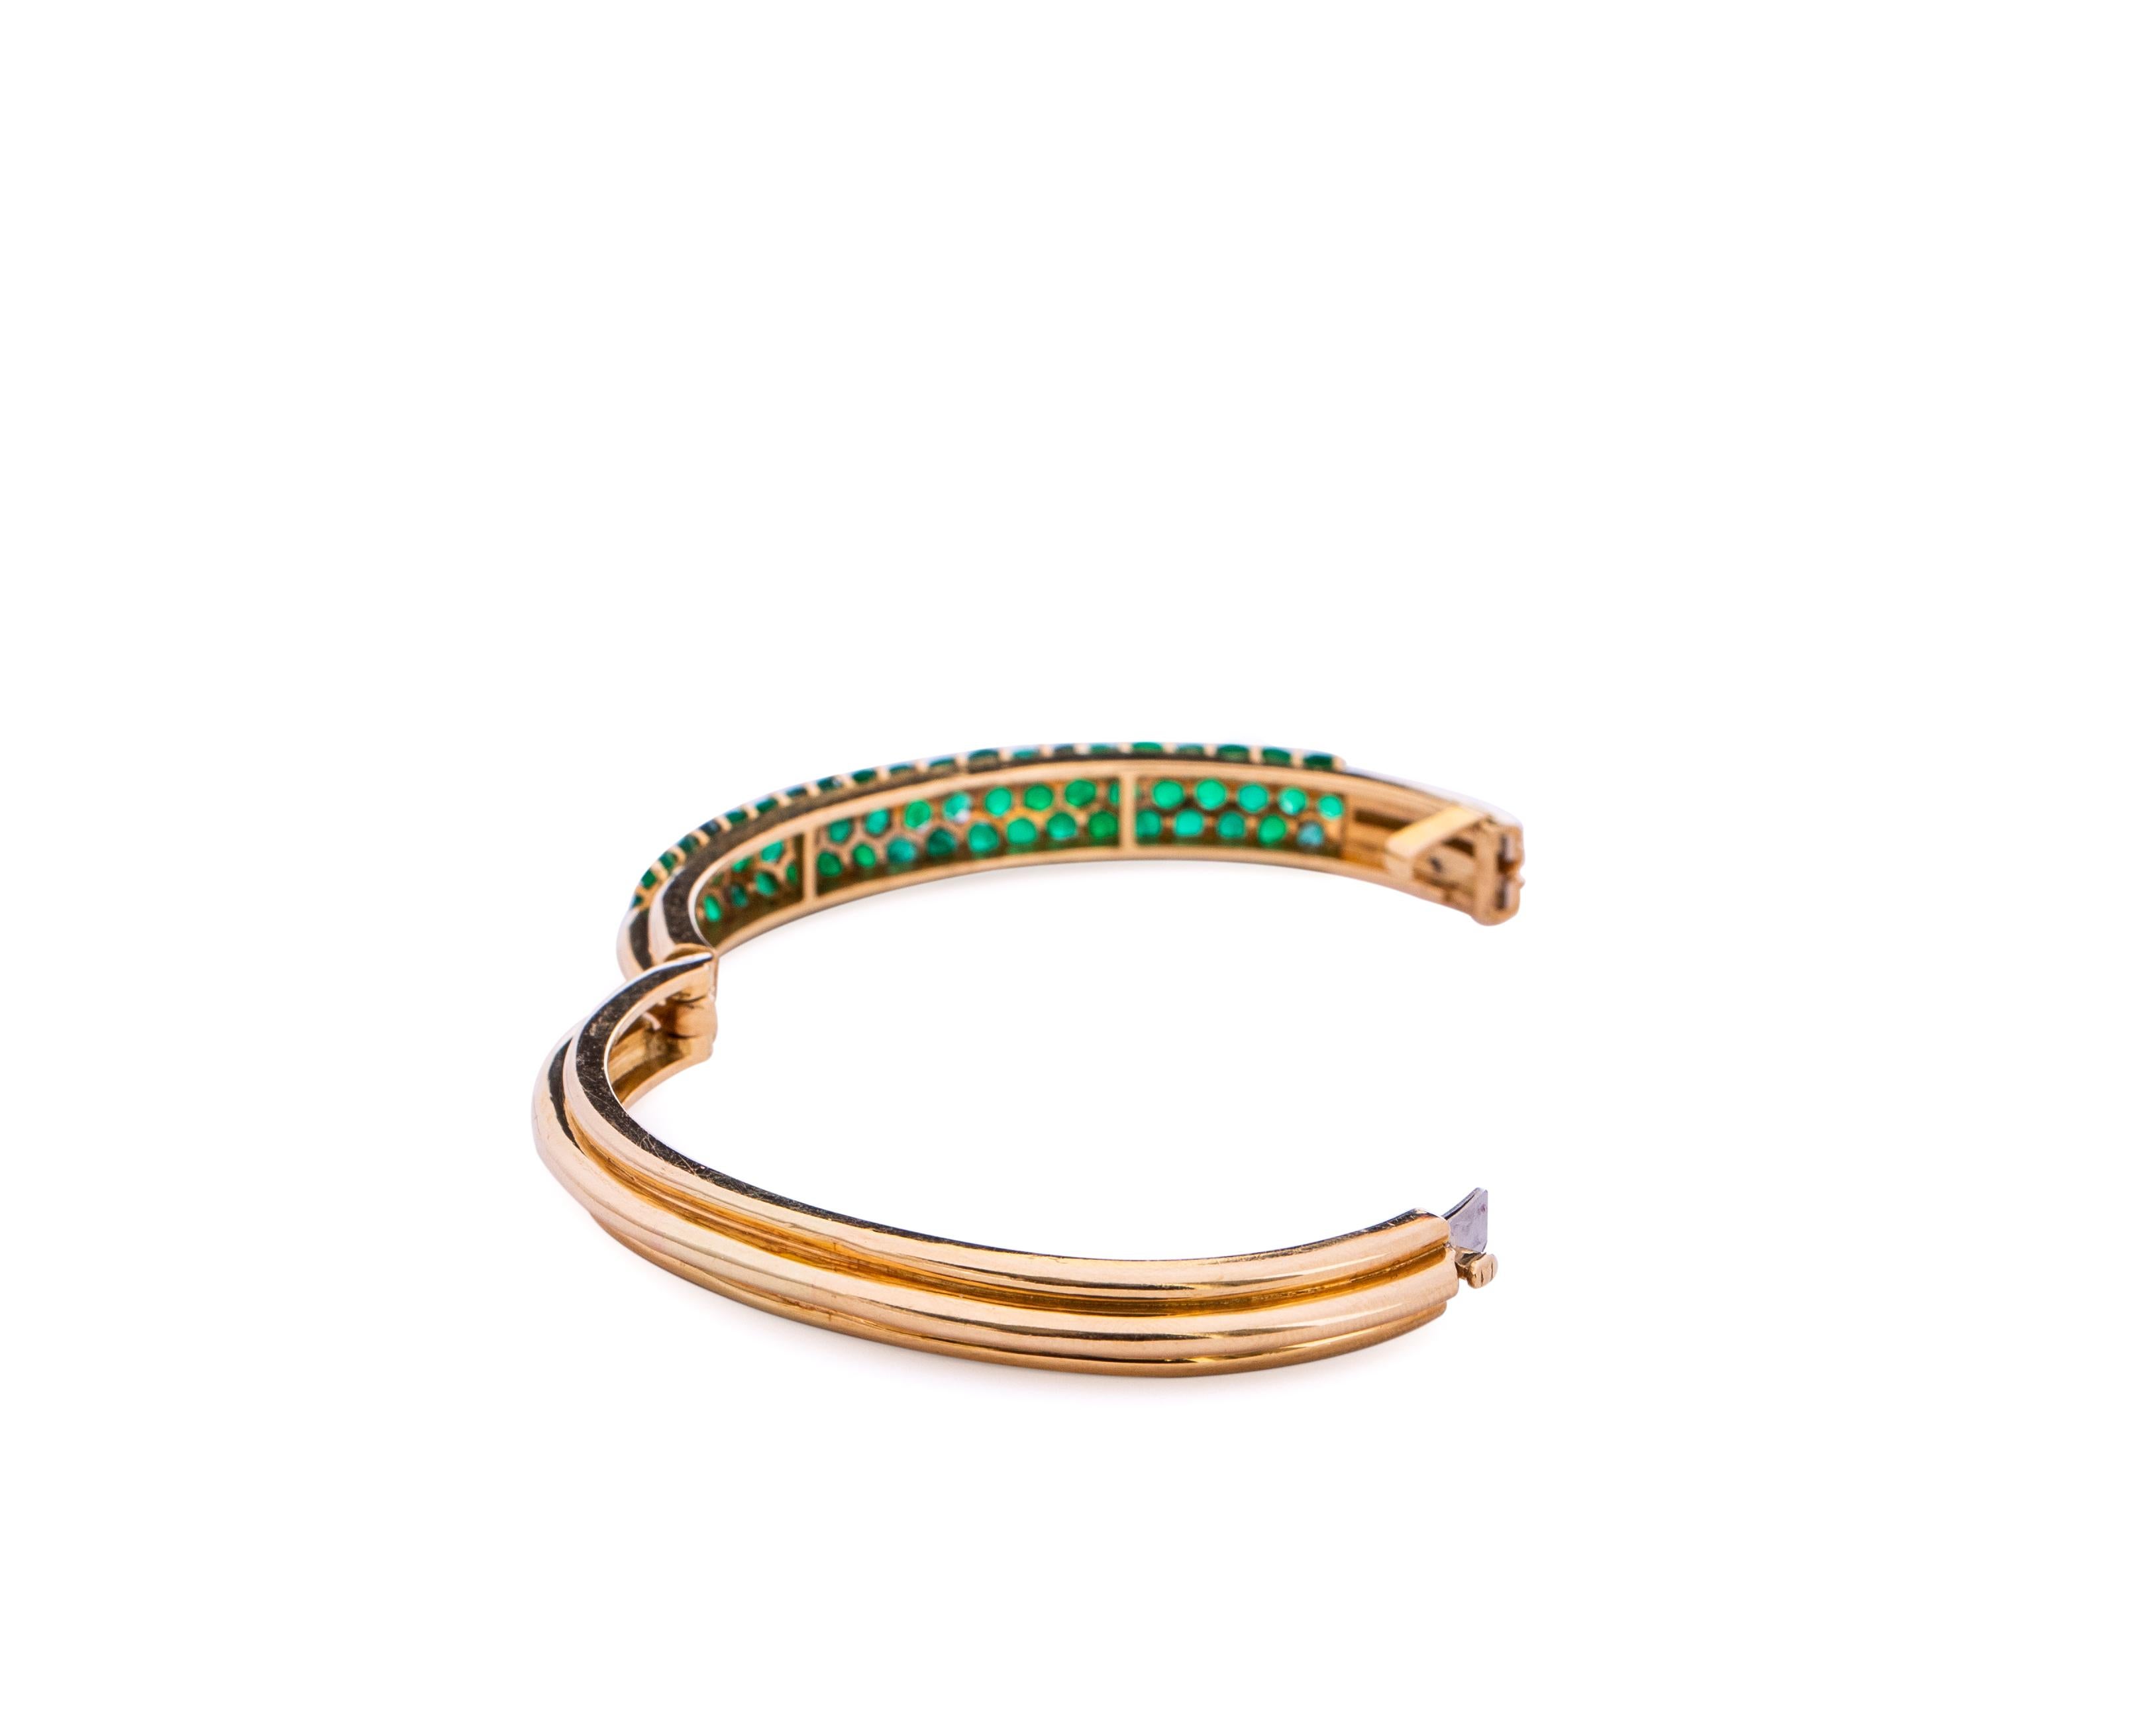 Item Details:
Metal Type: 18 Karat Yellow Gold
Weight: 30 grams
Fits a 7-8 inch wrist comfortably 
Secured by clasp which allows the bracelet to open up 

Emerald Details:
Carat: 3 Carats
Cut: Round
Color: Forest Green 